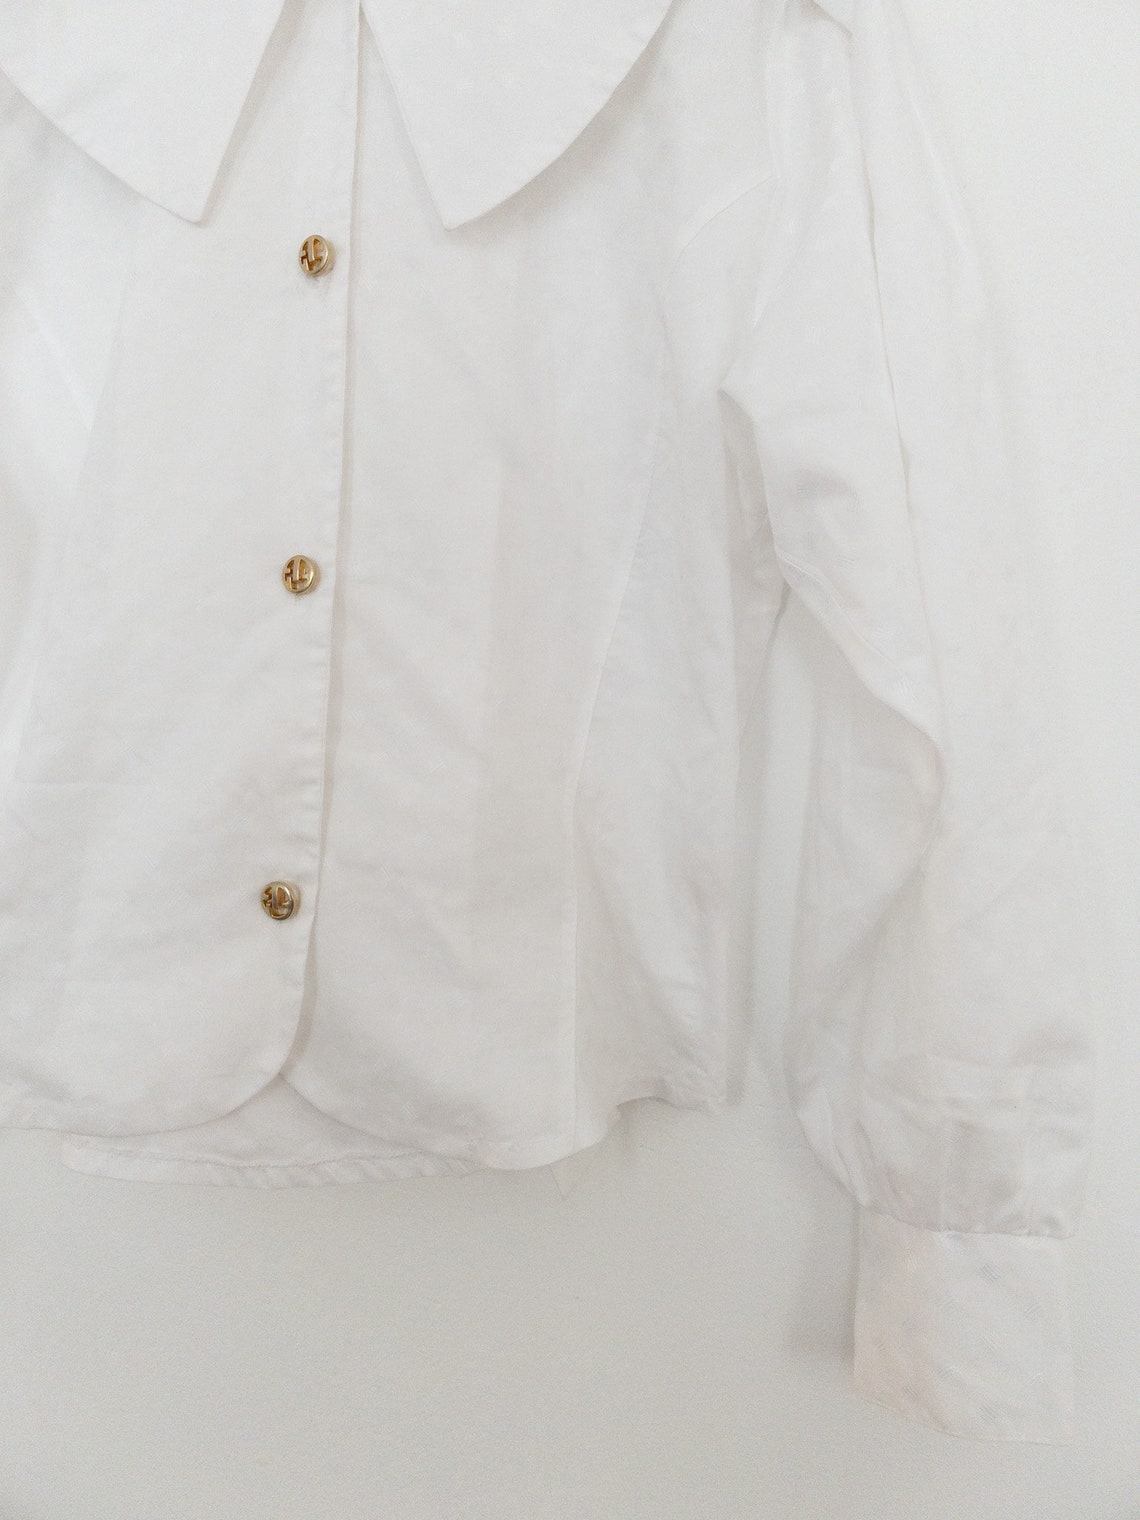 Vintage peter pan collar white blouse gold button up long | Etsy